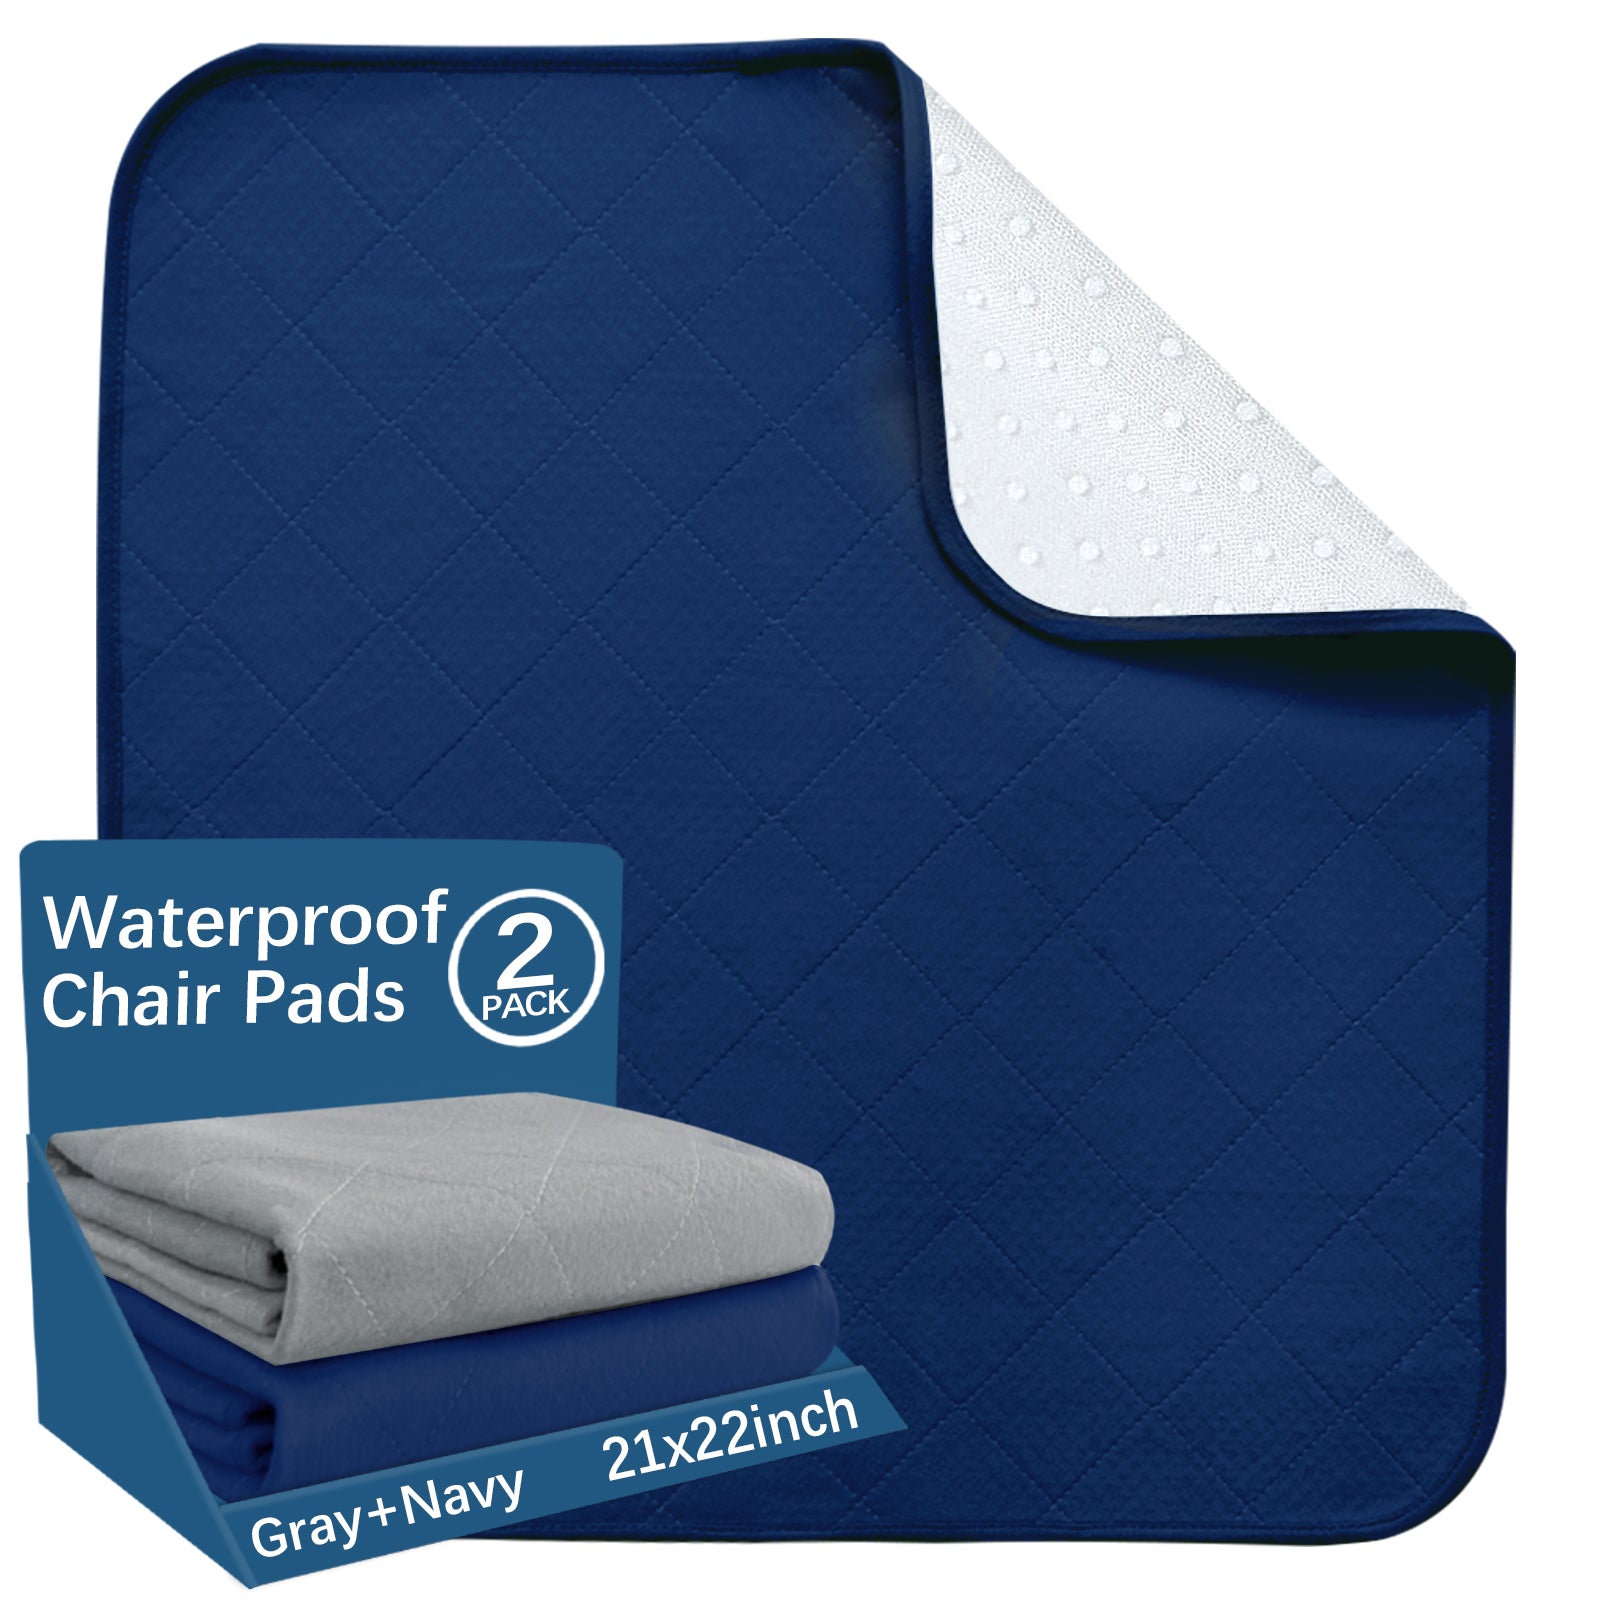 Incontinence Bed Pads - Reusable Waterproof Underpad Chair, Sofa and  Mattress Protectors - Highly Absorbent, Machine Washable - for Children,  Pets and